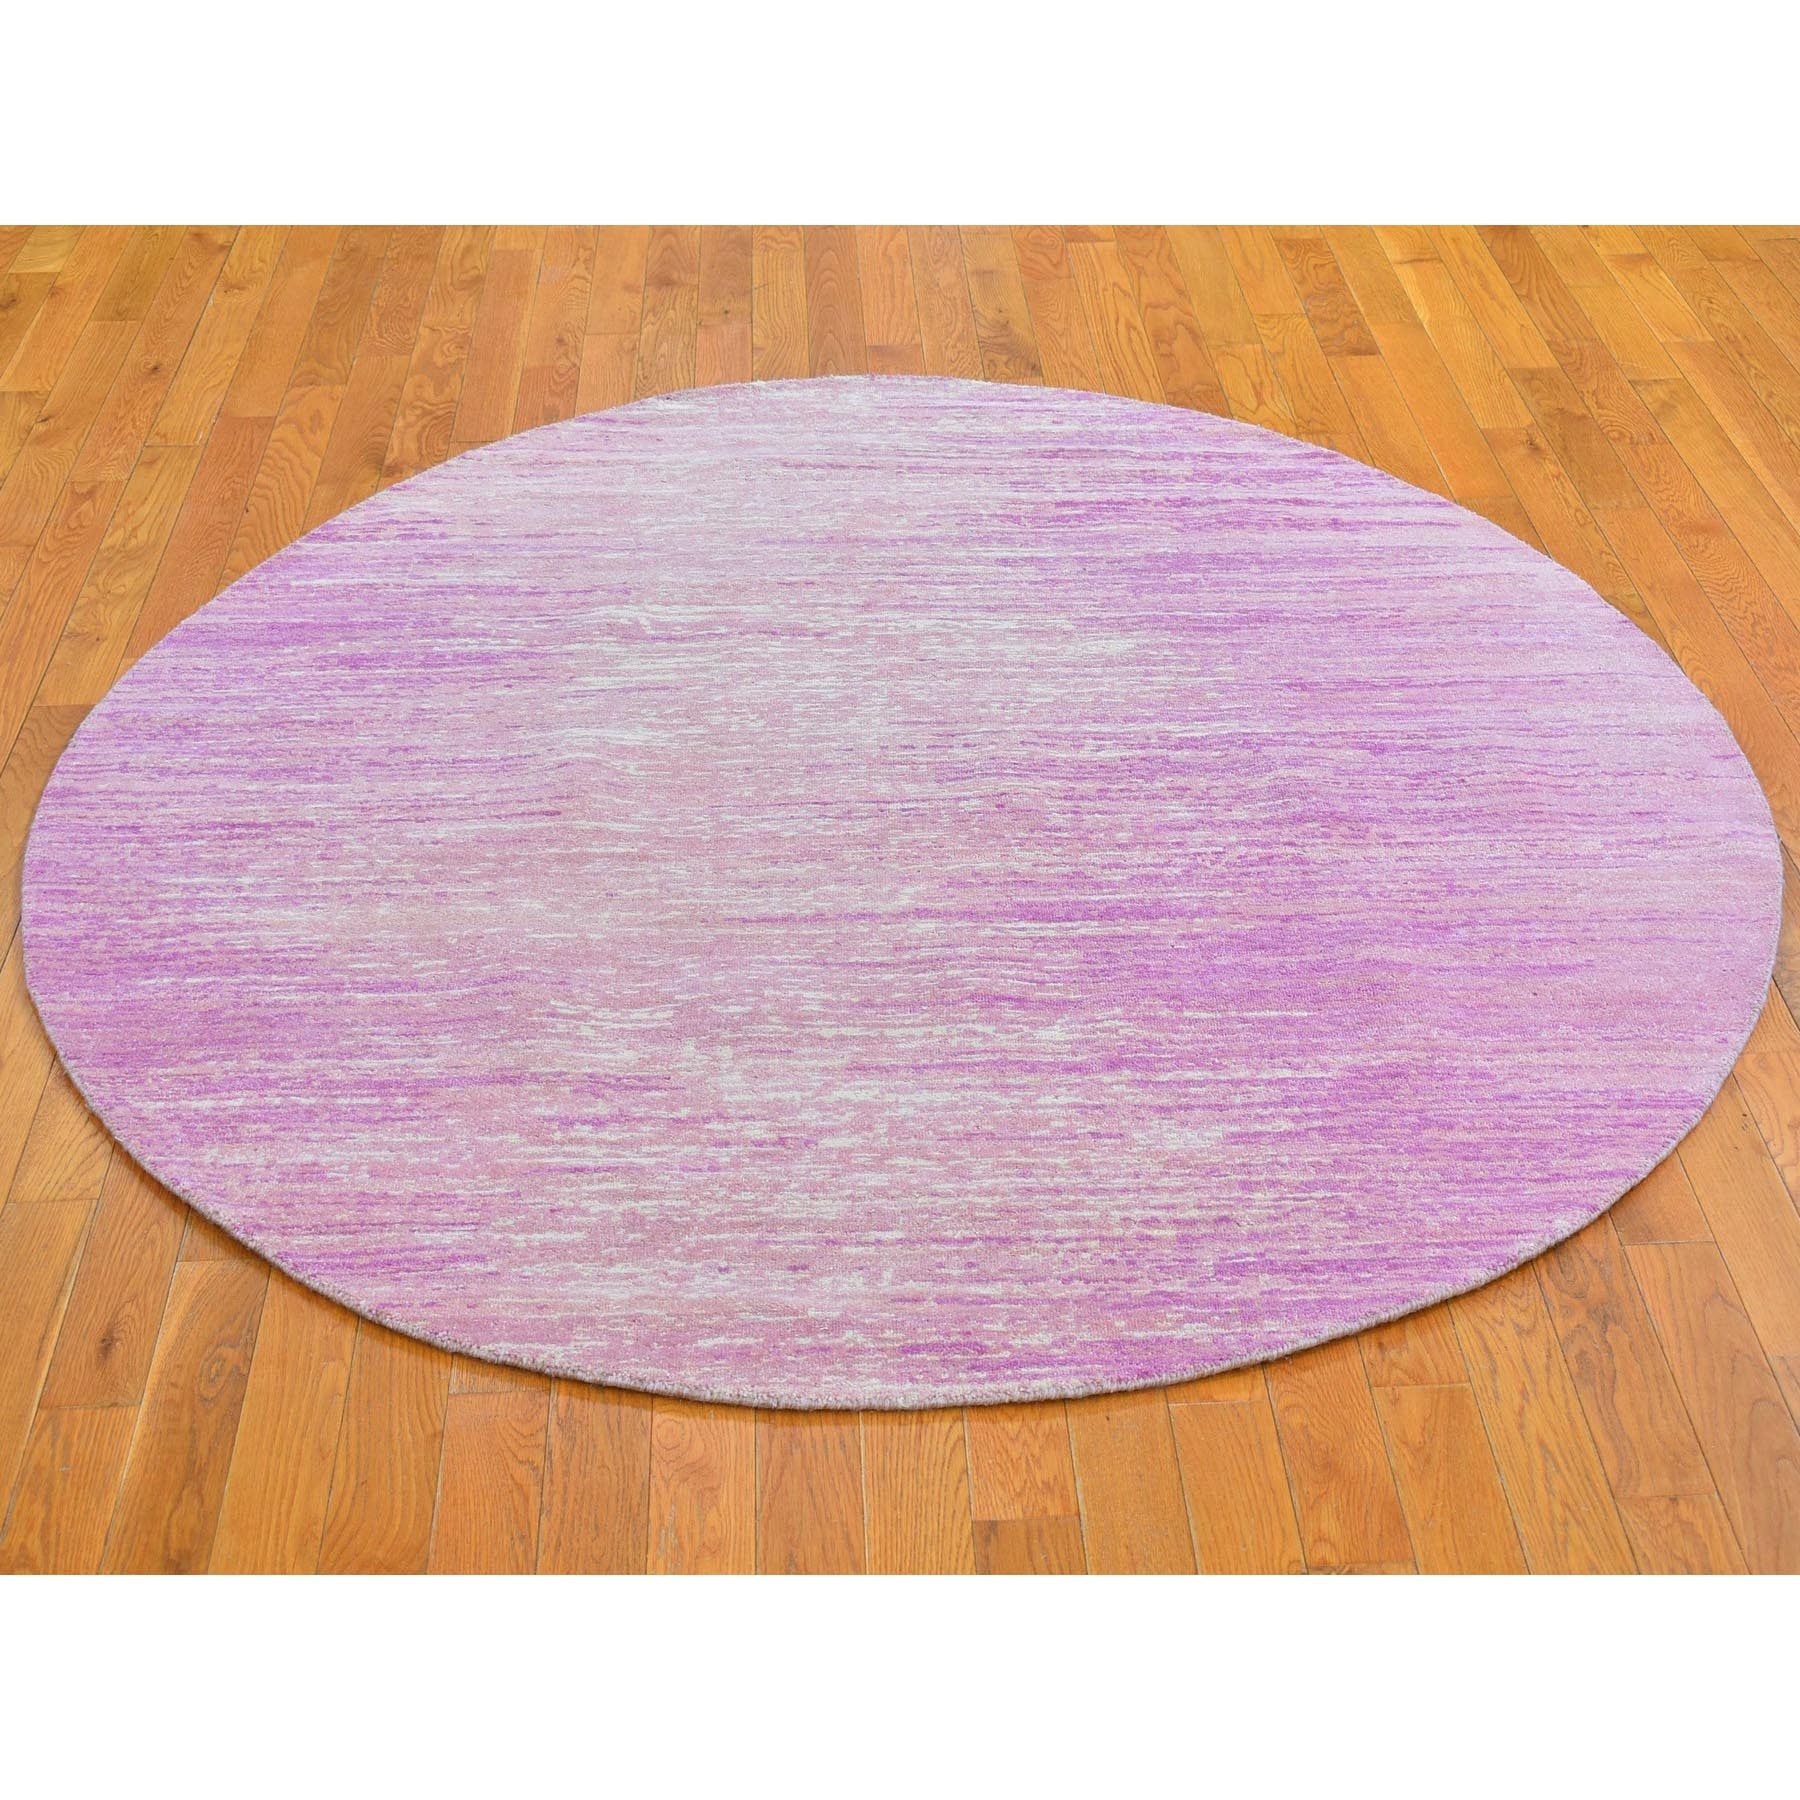 6'x6' Pink Pure Wool Ombre Design Zero Pile Hand Woven Round Oriental Rug 